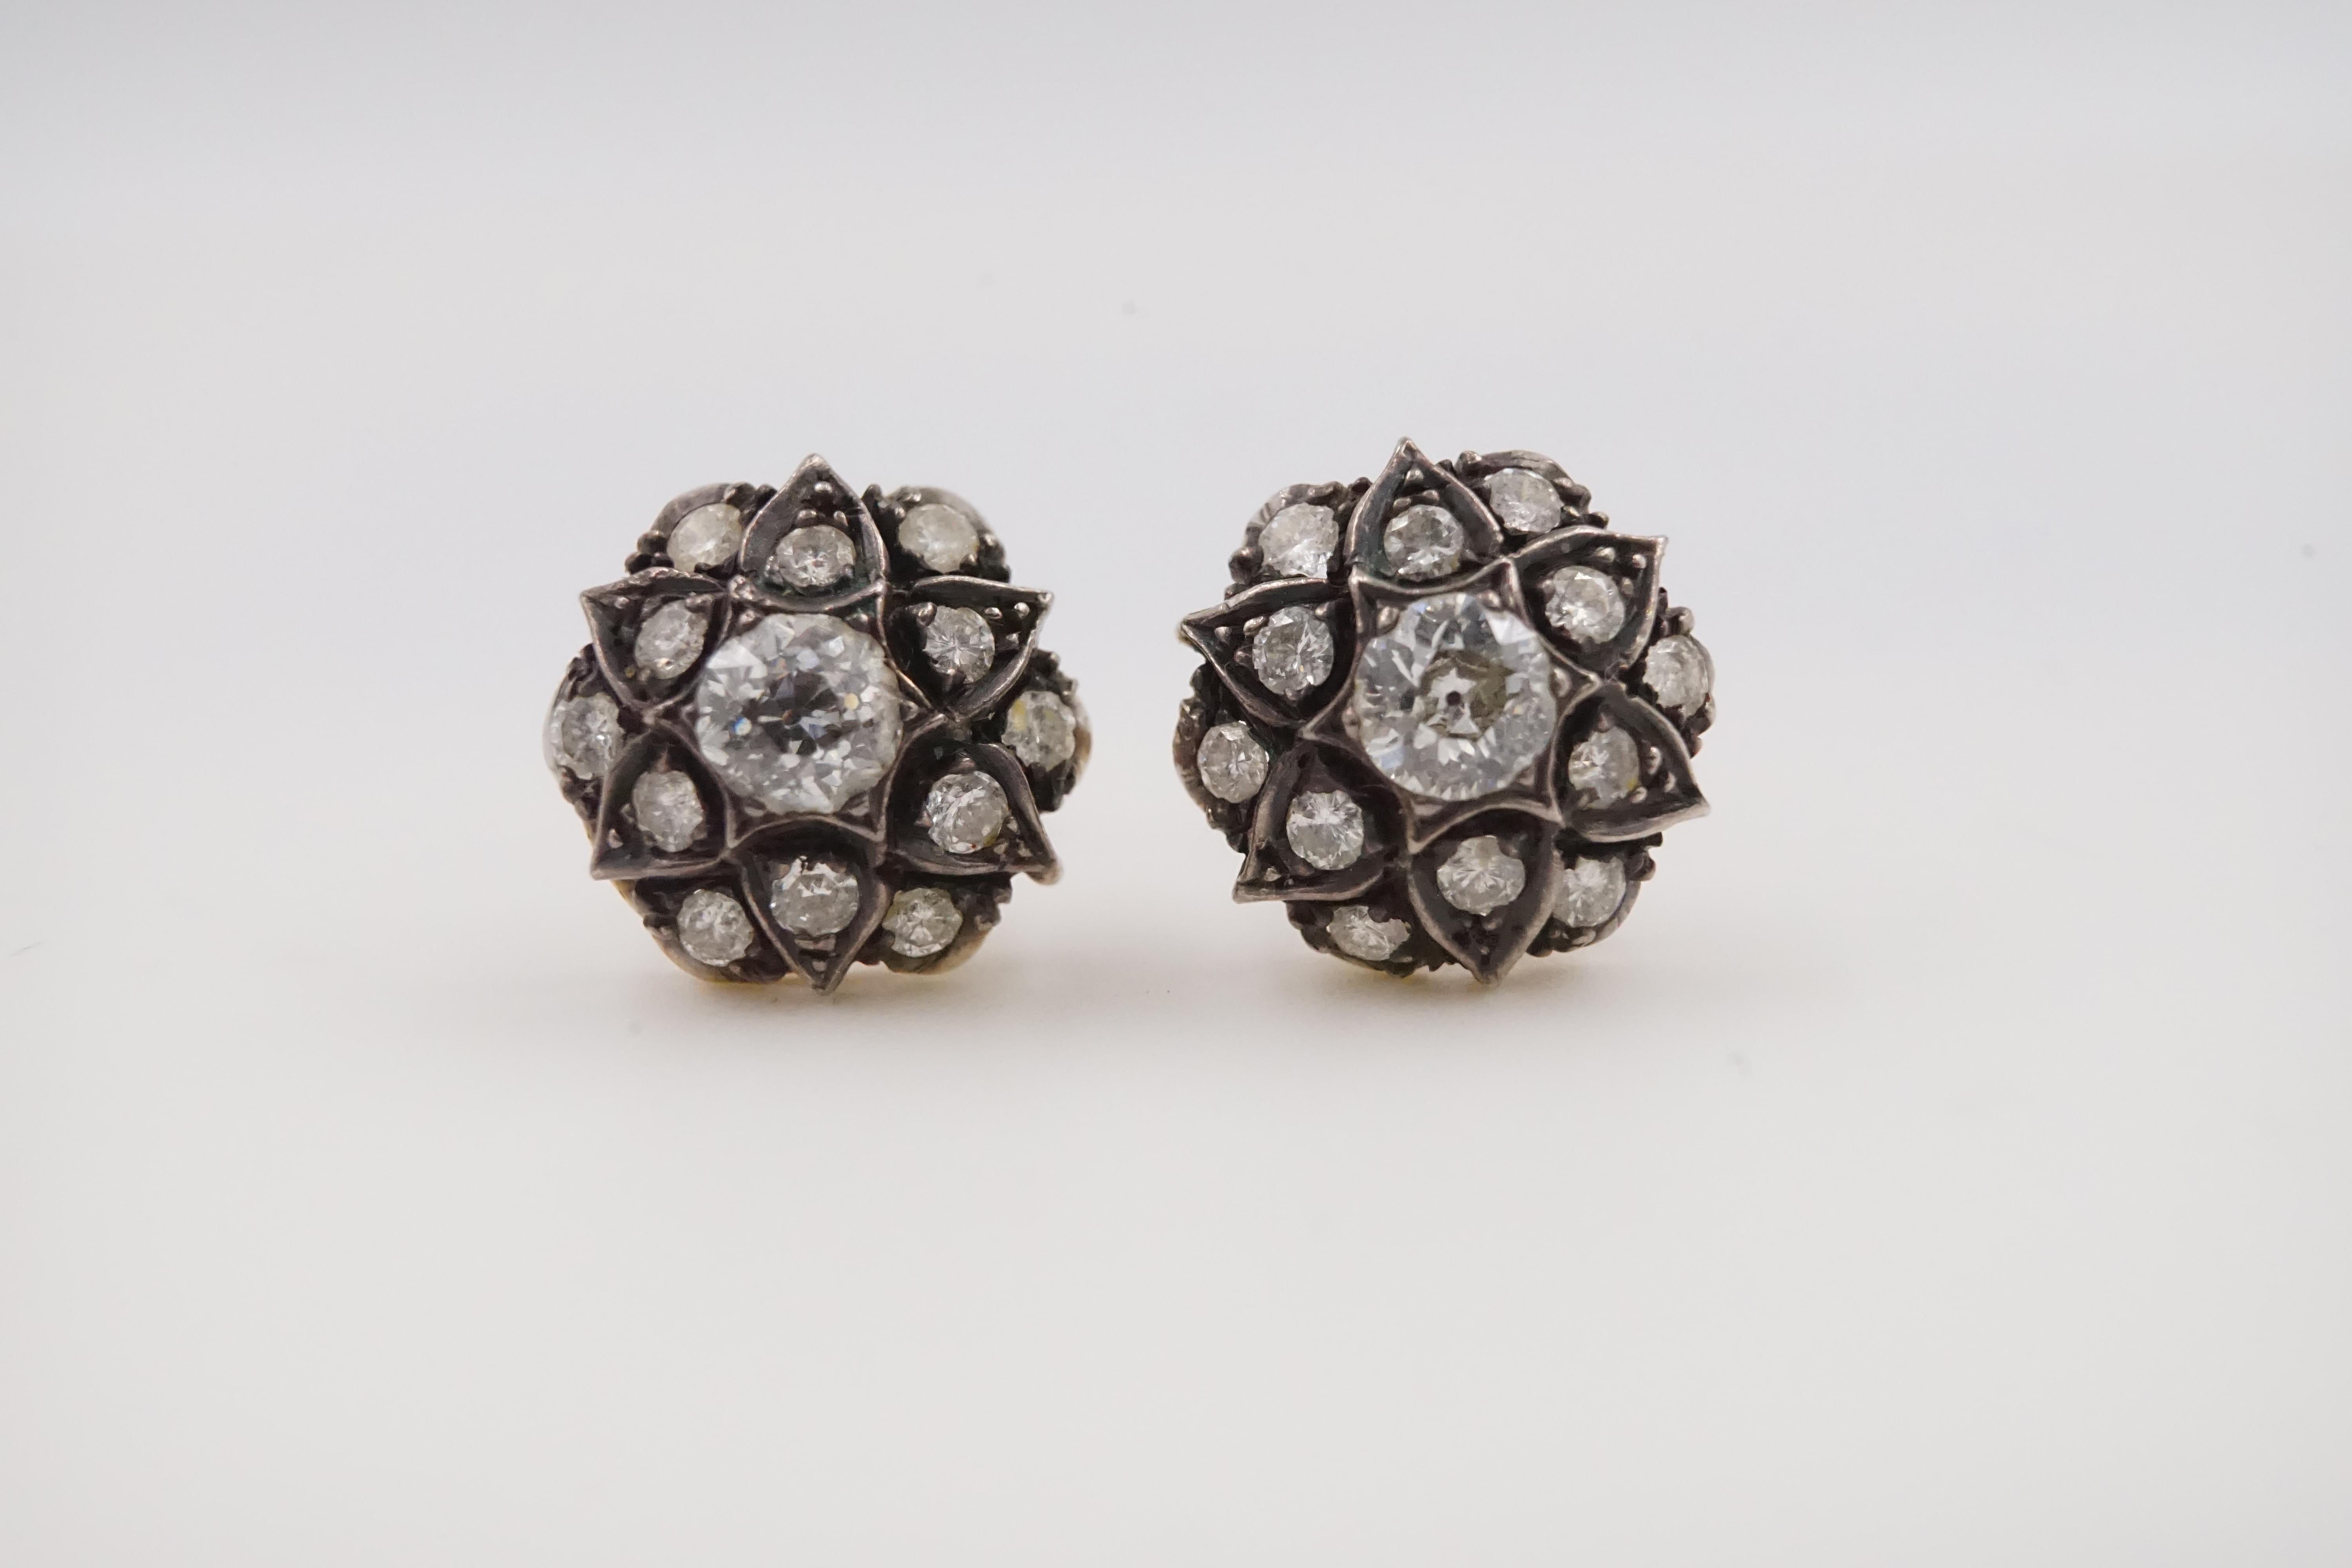 An Victorian Star Old Cut Diamond Earring. Silver on gold, the centre diamond on each earring is approx 0.5ct overall 1.9ct.

W: 1.4cm D: 1.9cm

Weight: 4.19g